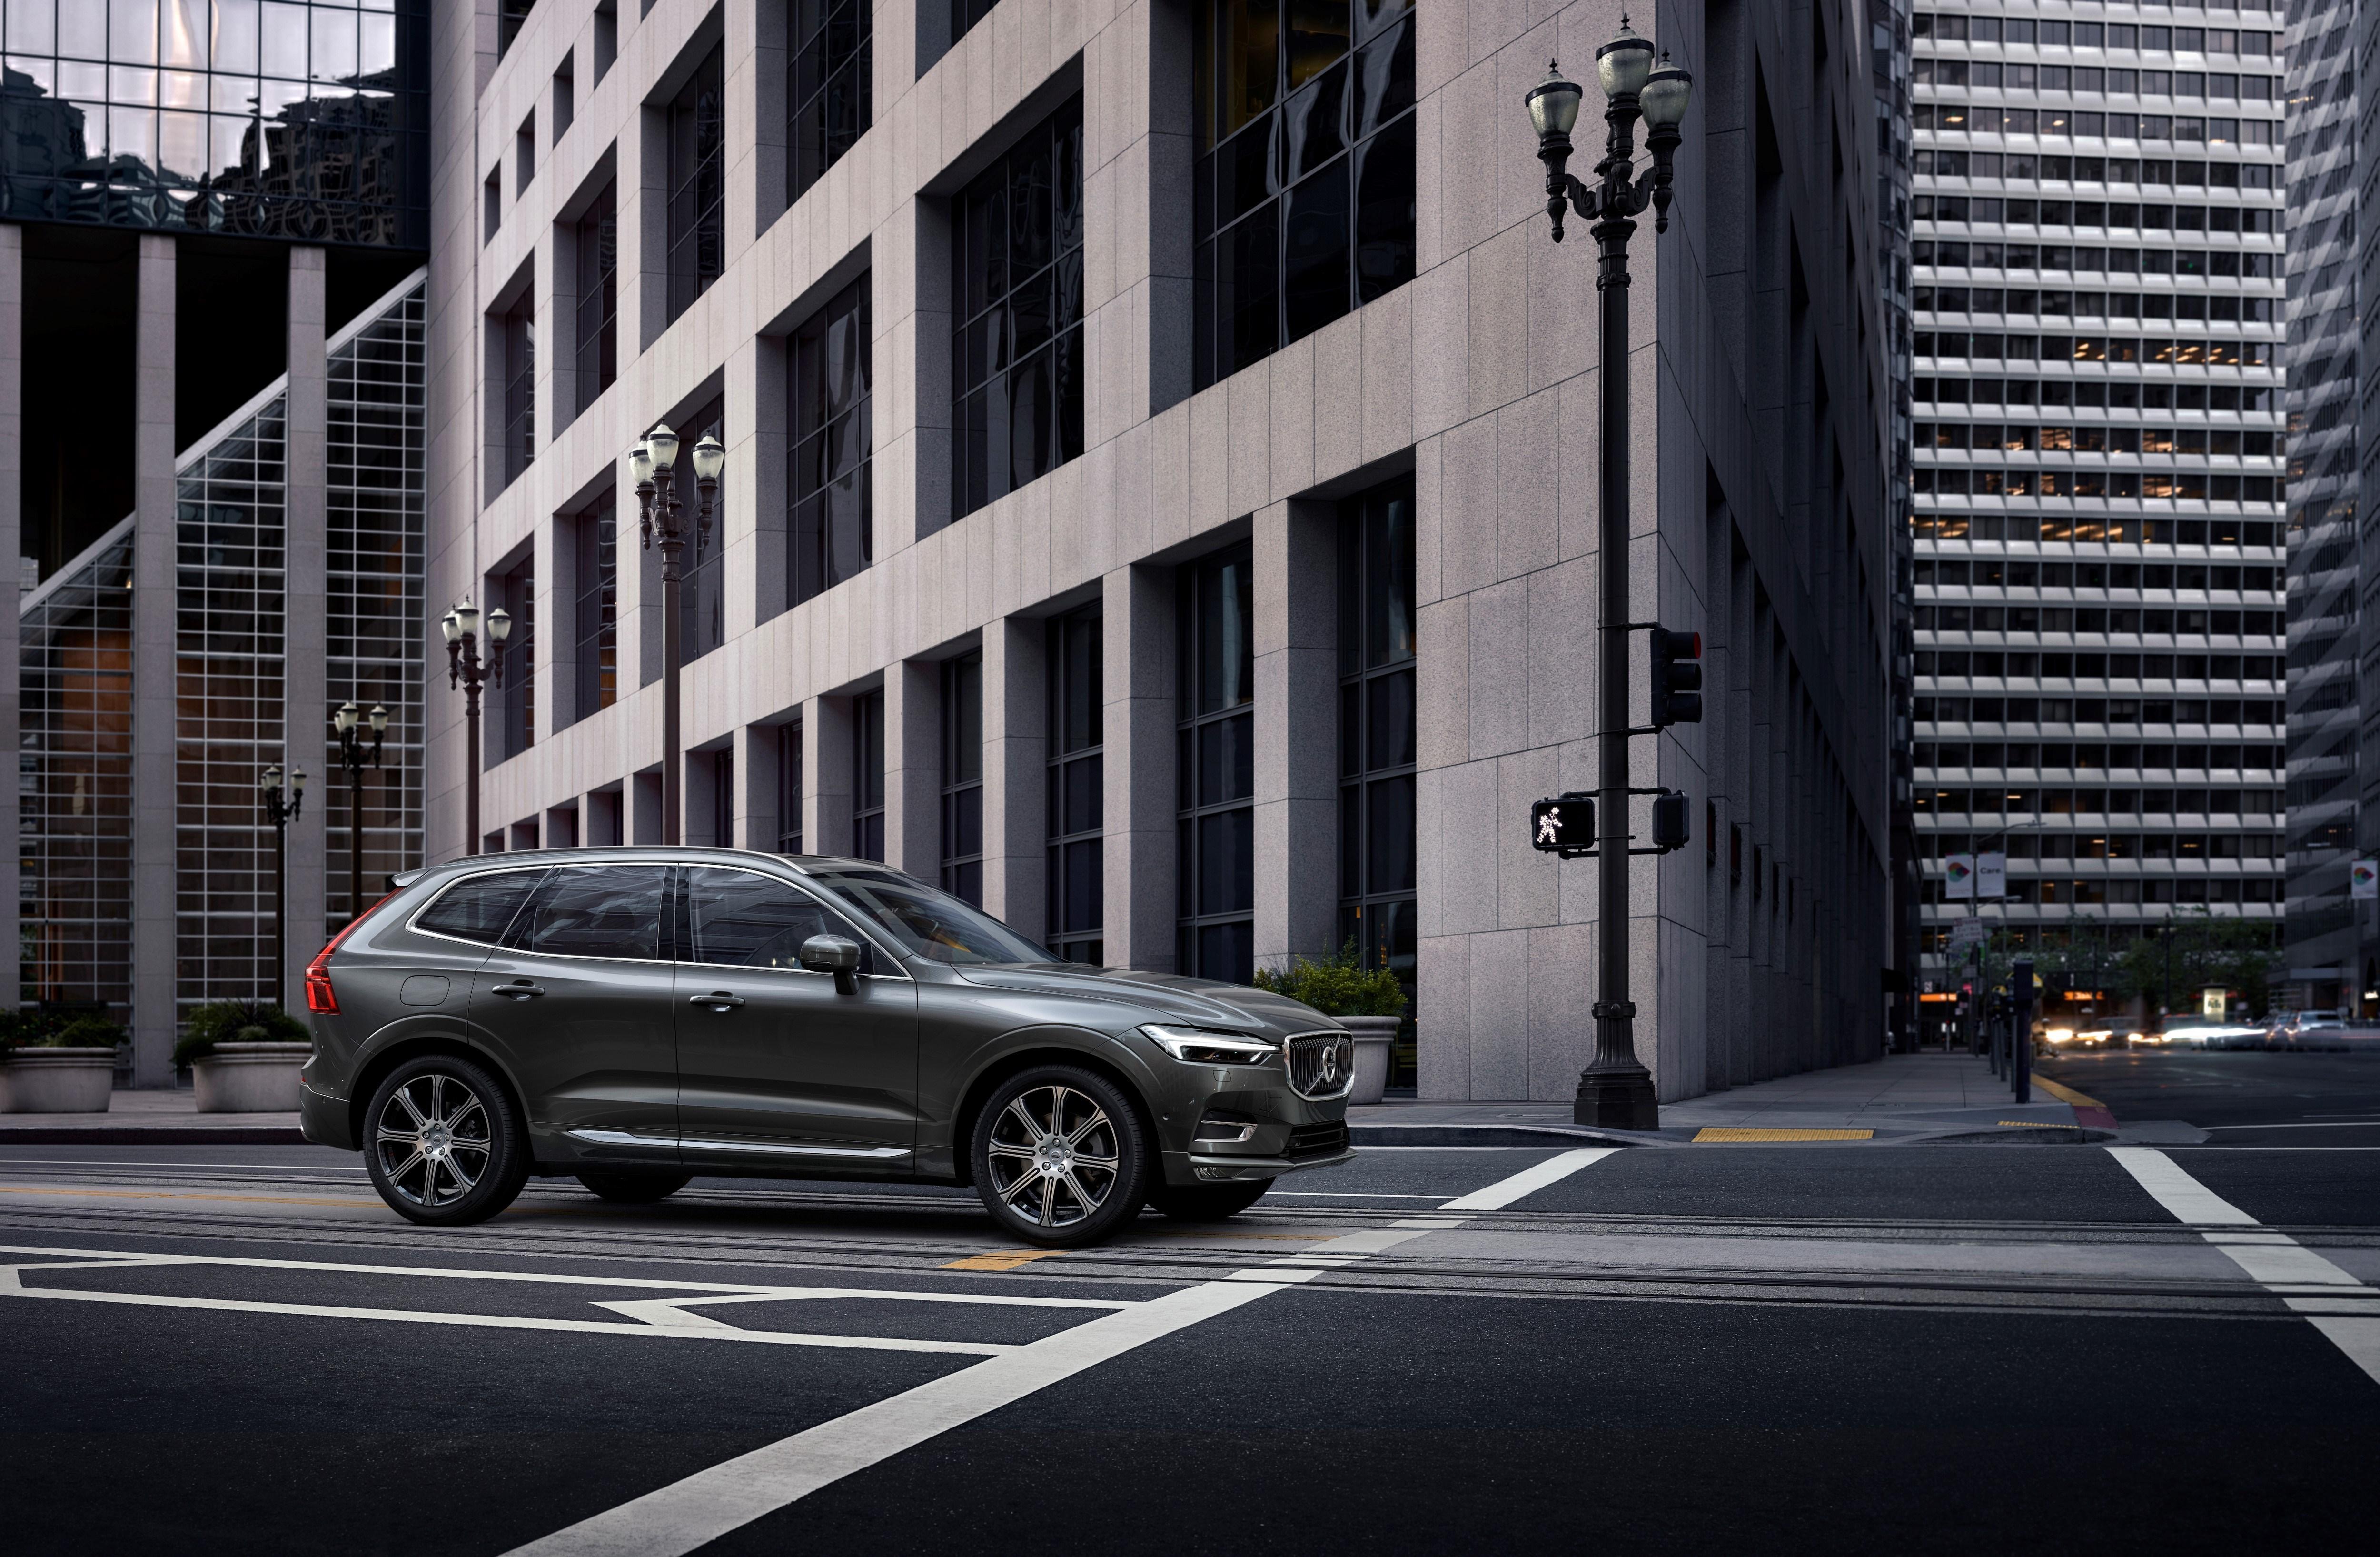 2018 Volvo XC60 is the World Car of the Year